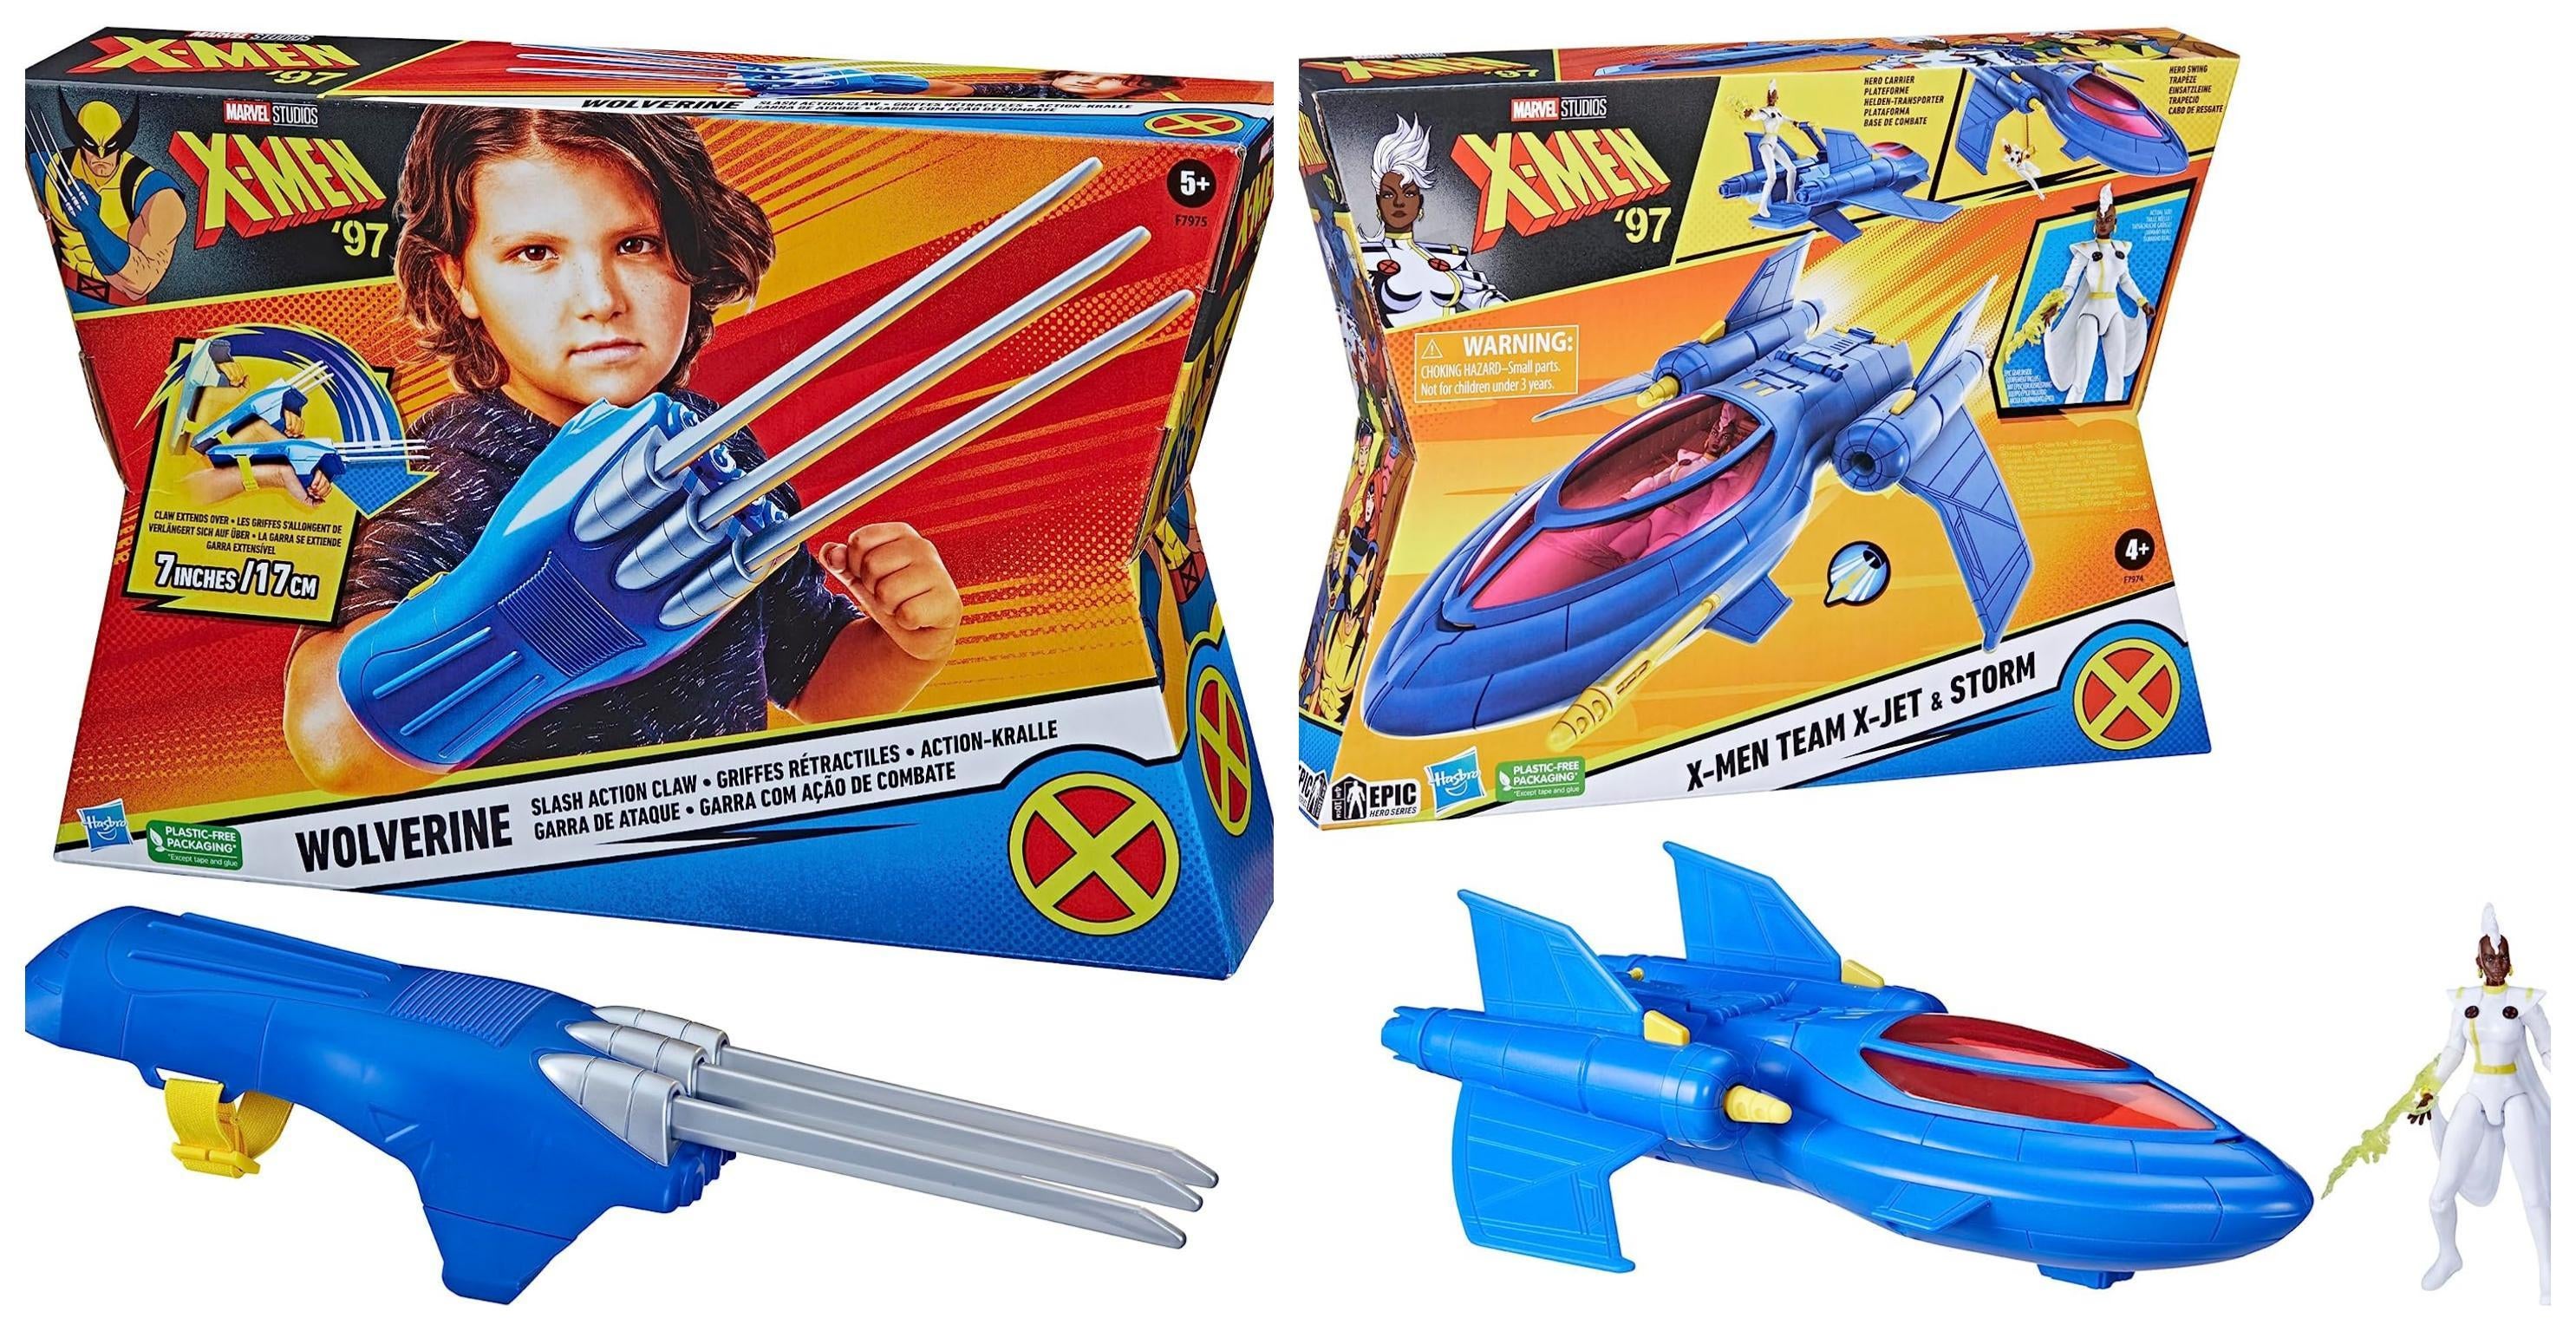 XMen '97 Epic Hero Series Lineup Includes An Affordable 14Inch